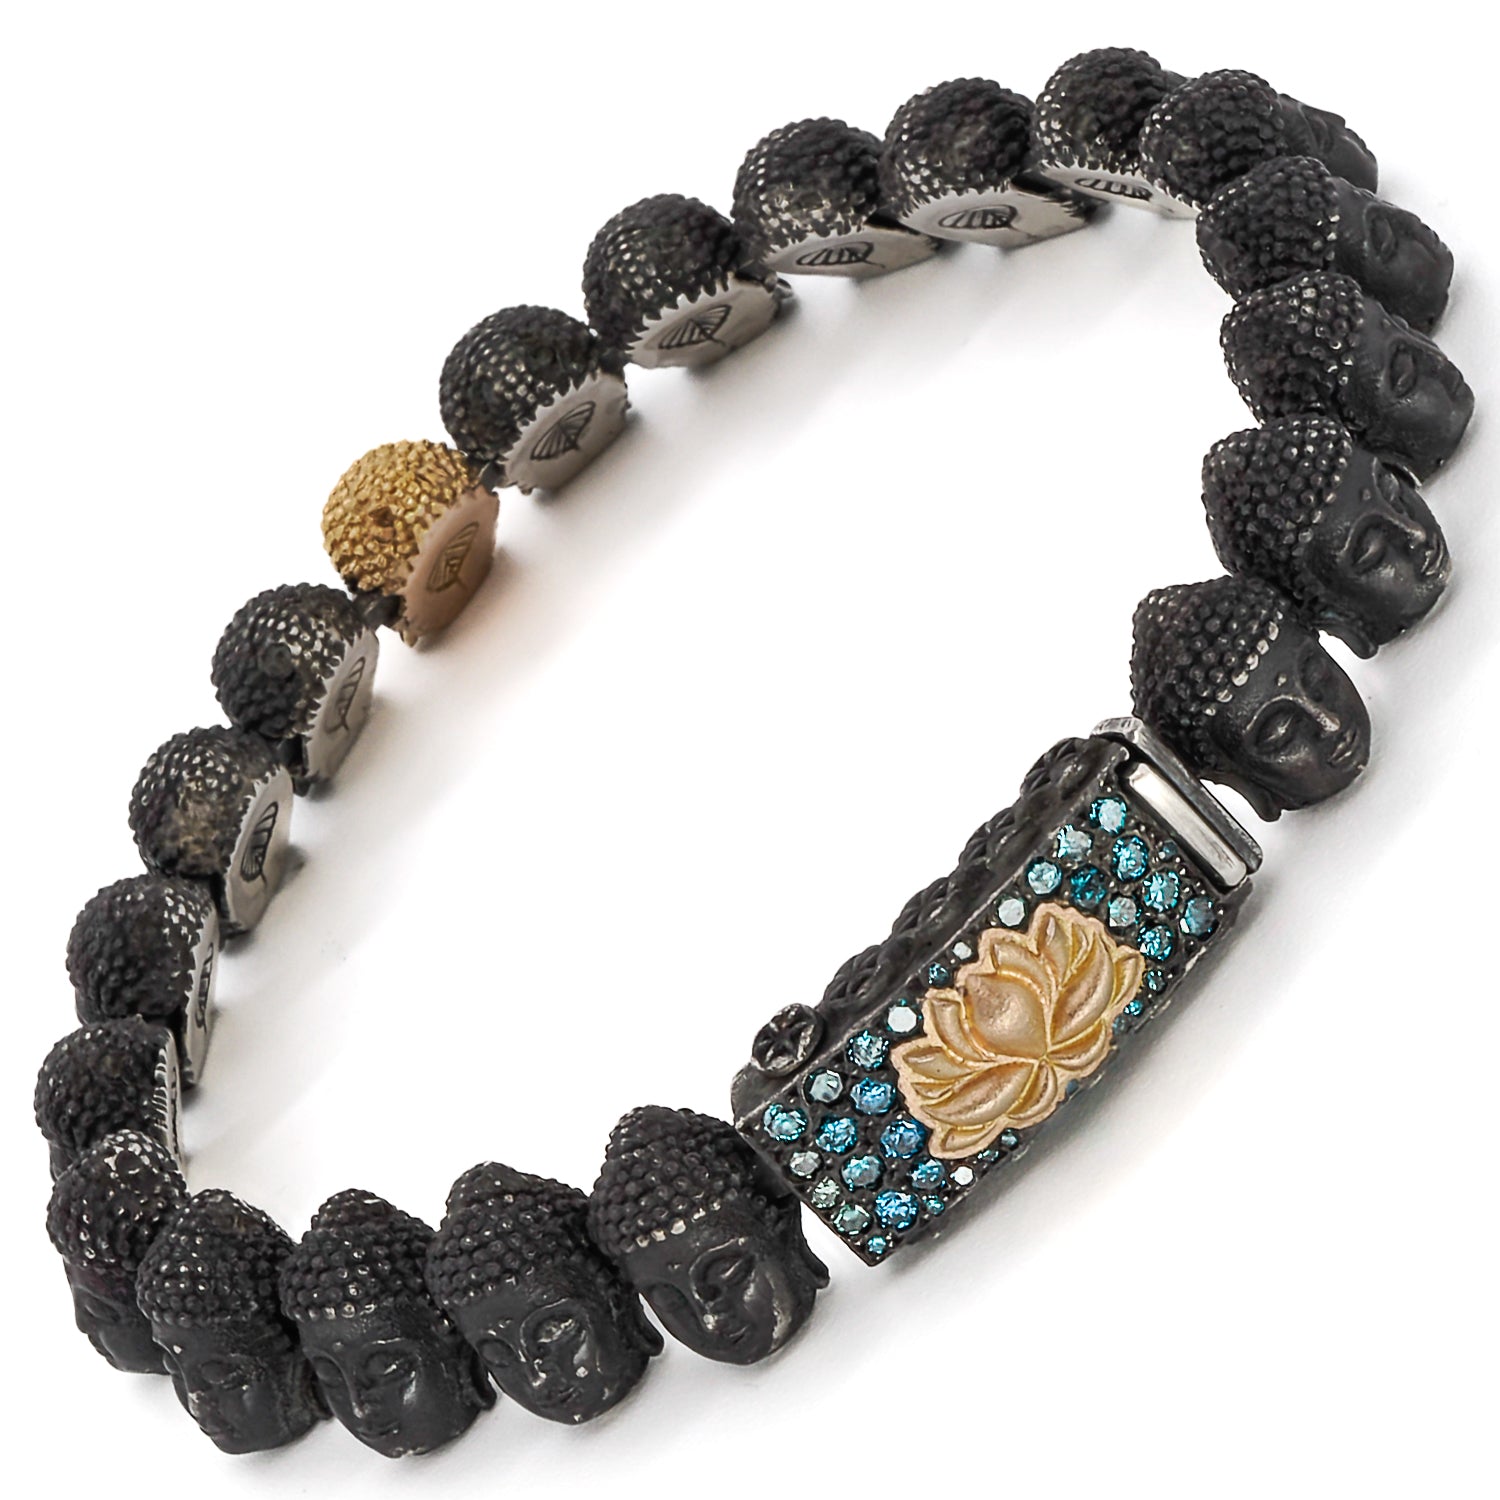 Recycled Materials - Gold and Silver Buddha Bracelet, an eco-friendly choice.